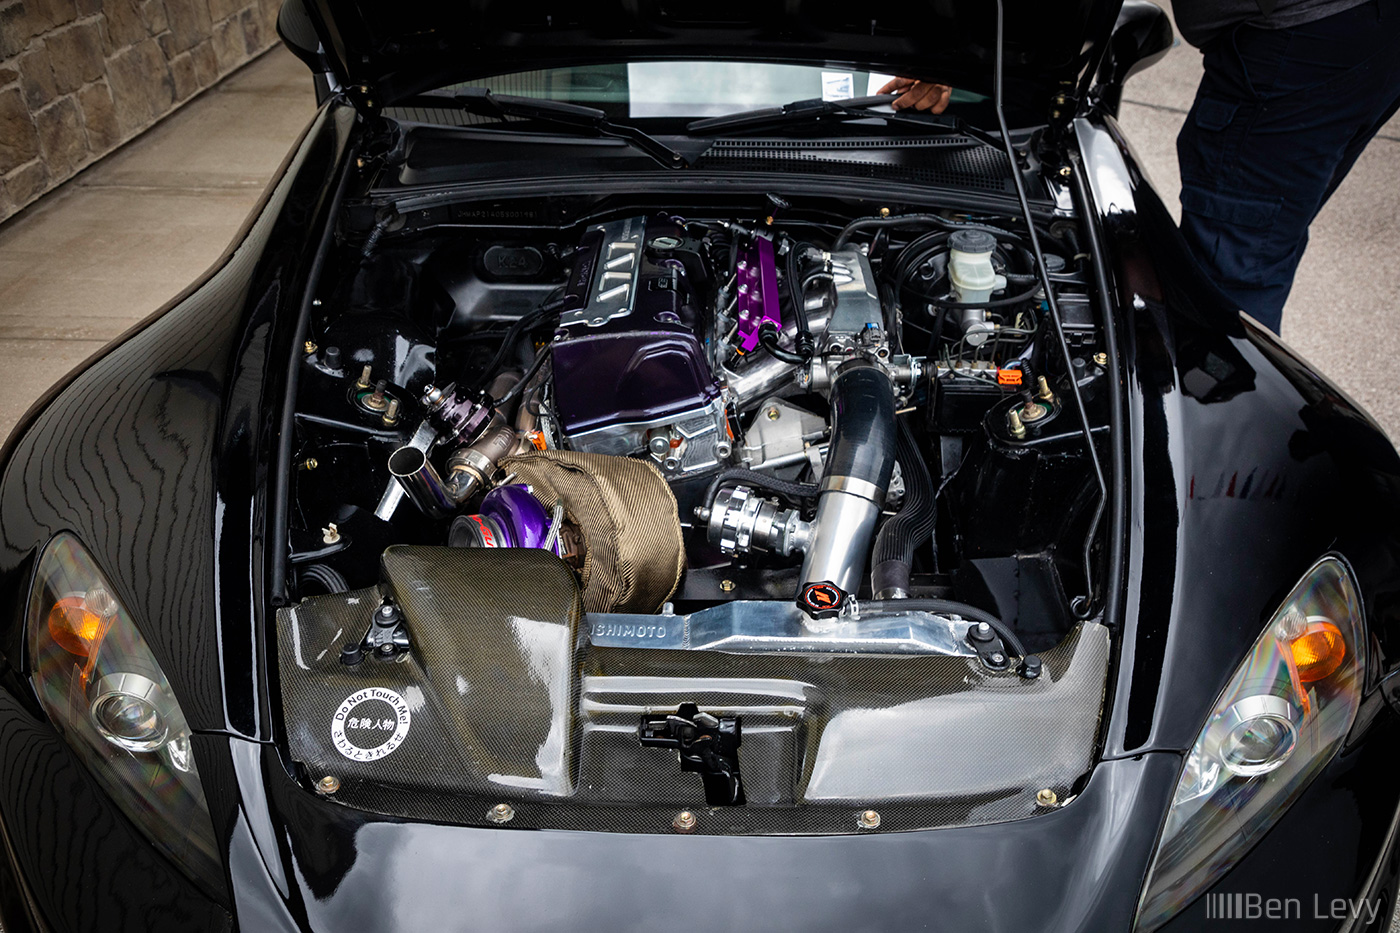 Engine Bay of K Swapped Honda S2000 with Turbo